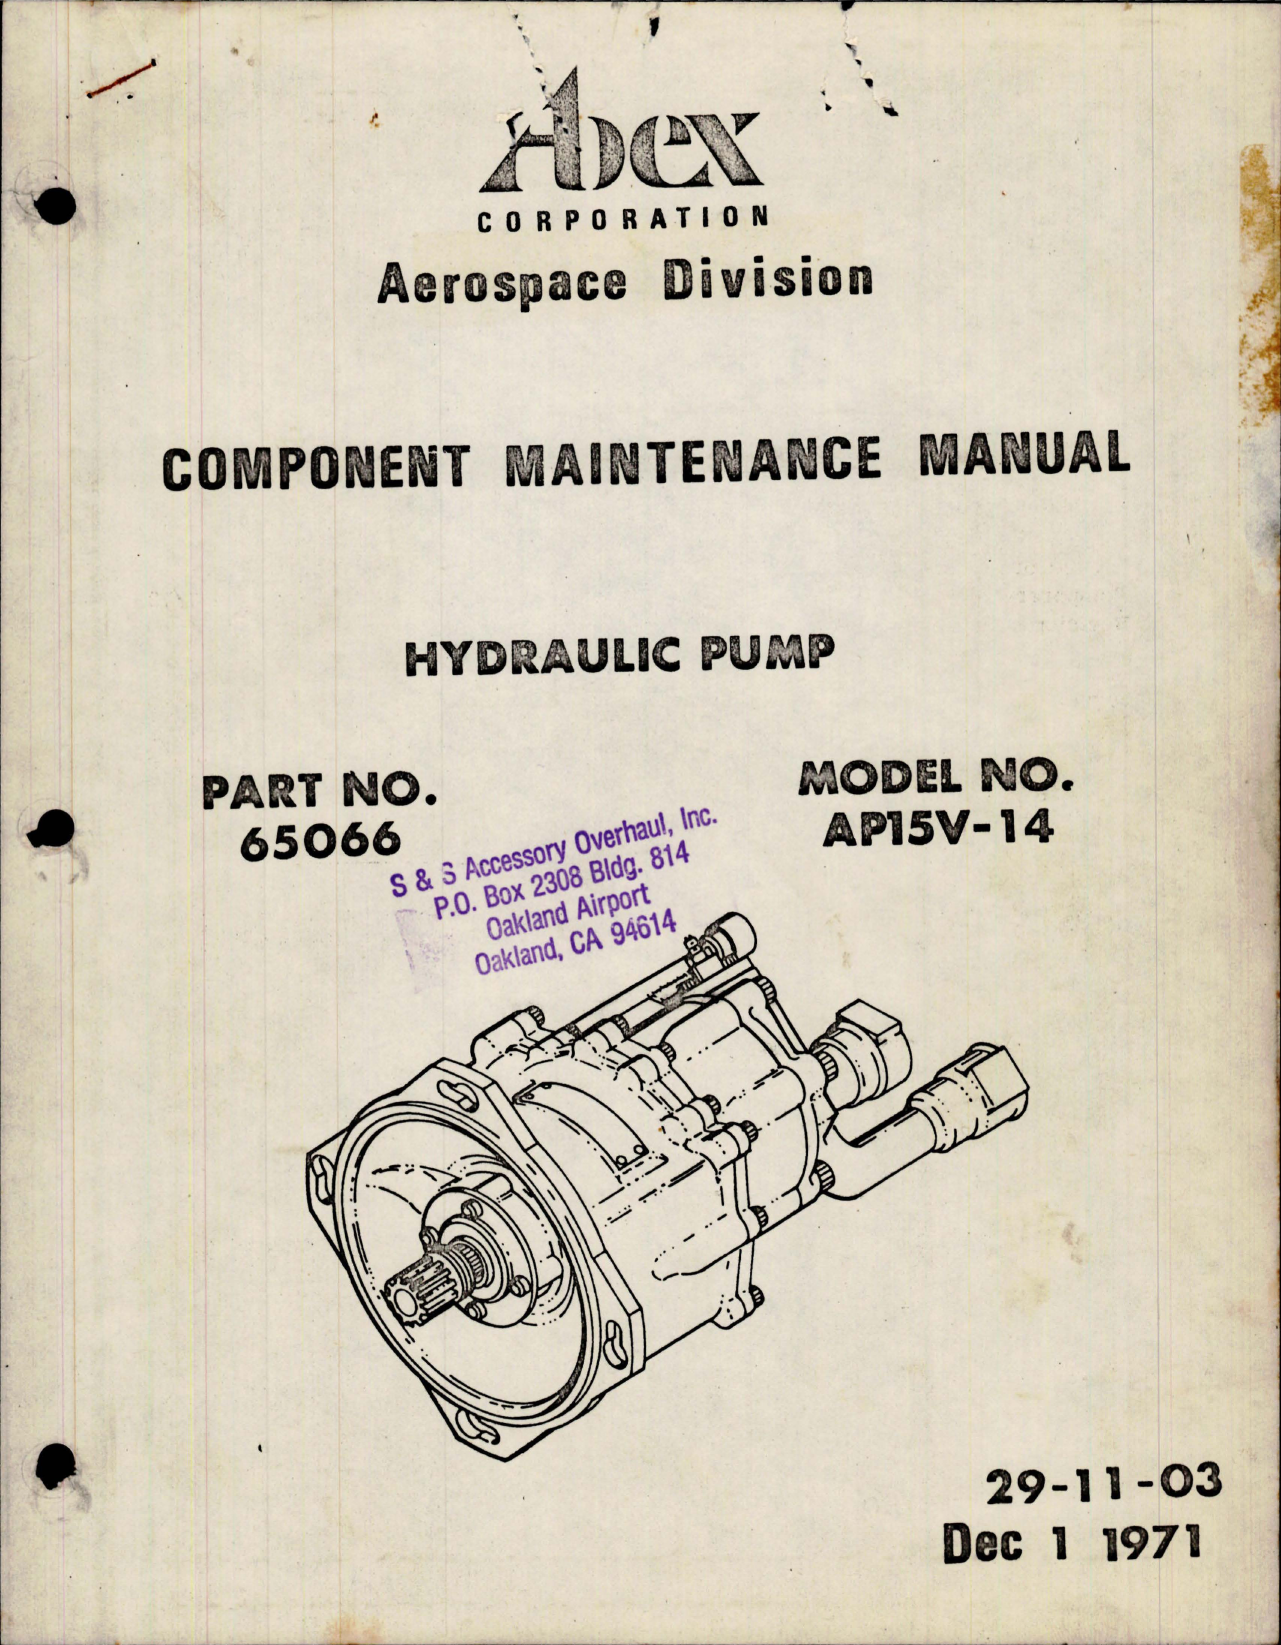 Sample page 1 from AirCorps Library document: Component Maintenance Manual for Hydraulic Pump - Part 65066 - Model AP15V-14 